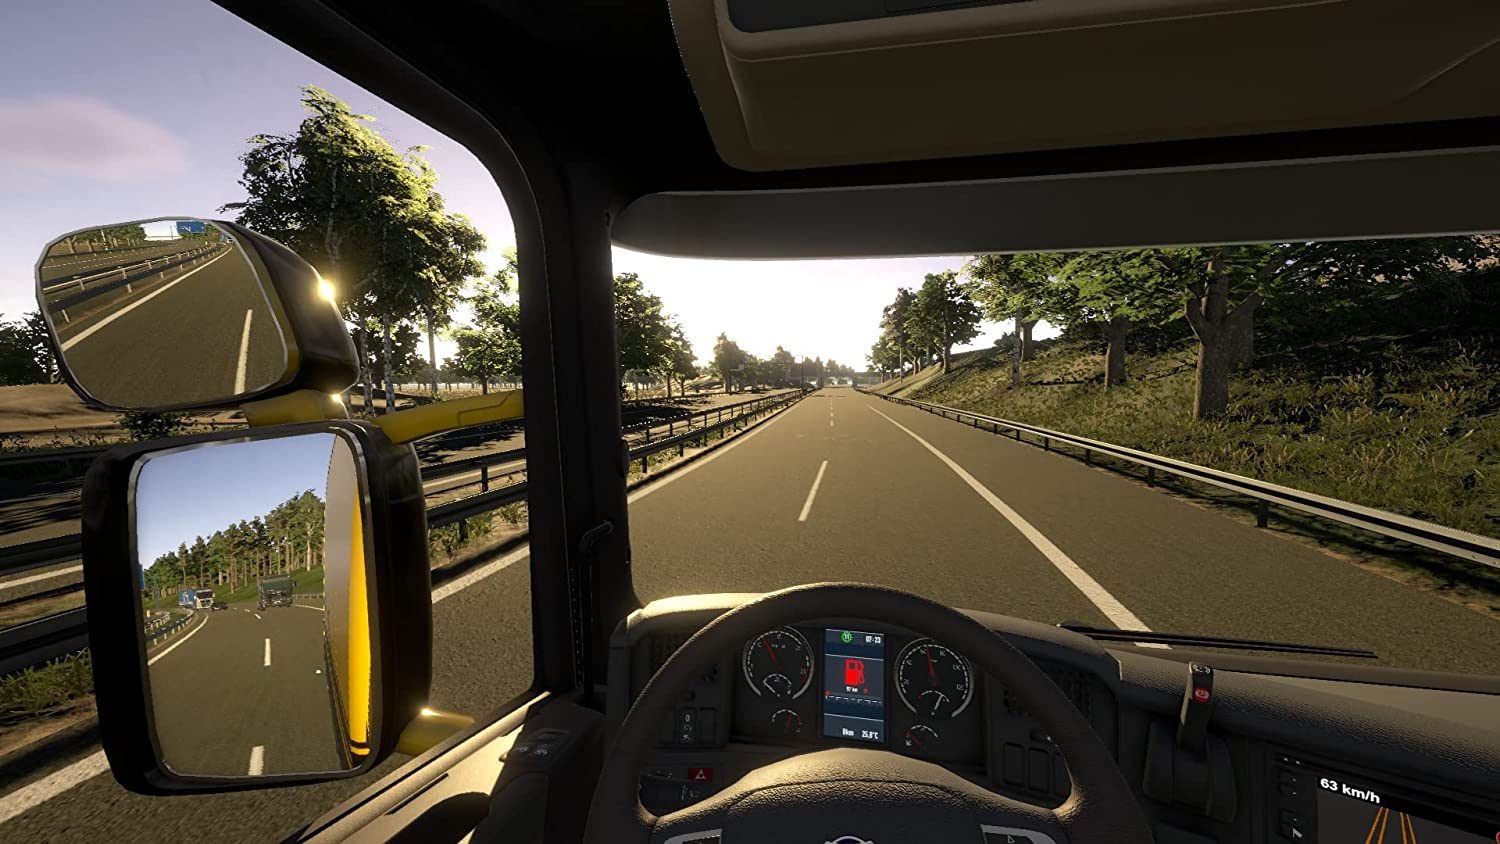 Симулятор playstation 4. On the Road Truck Simulator. PS симулятор. Симуляторы на ps4. Truck Driver ps4.